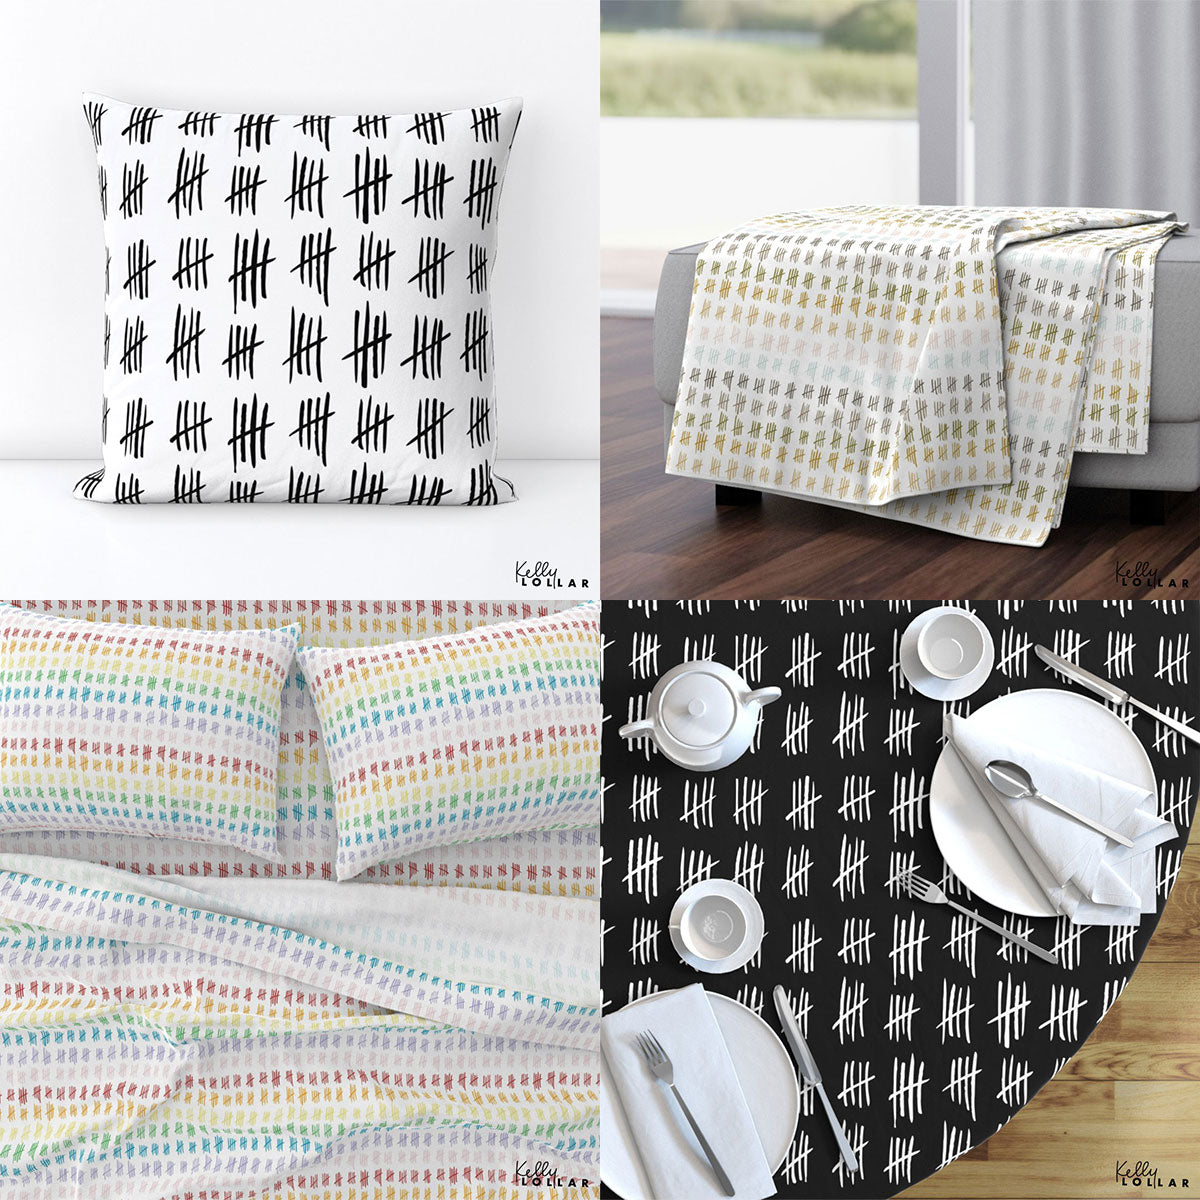 Inky Doodles Collection, Inky Tally Marks Pattern by Kelly Lollar